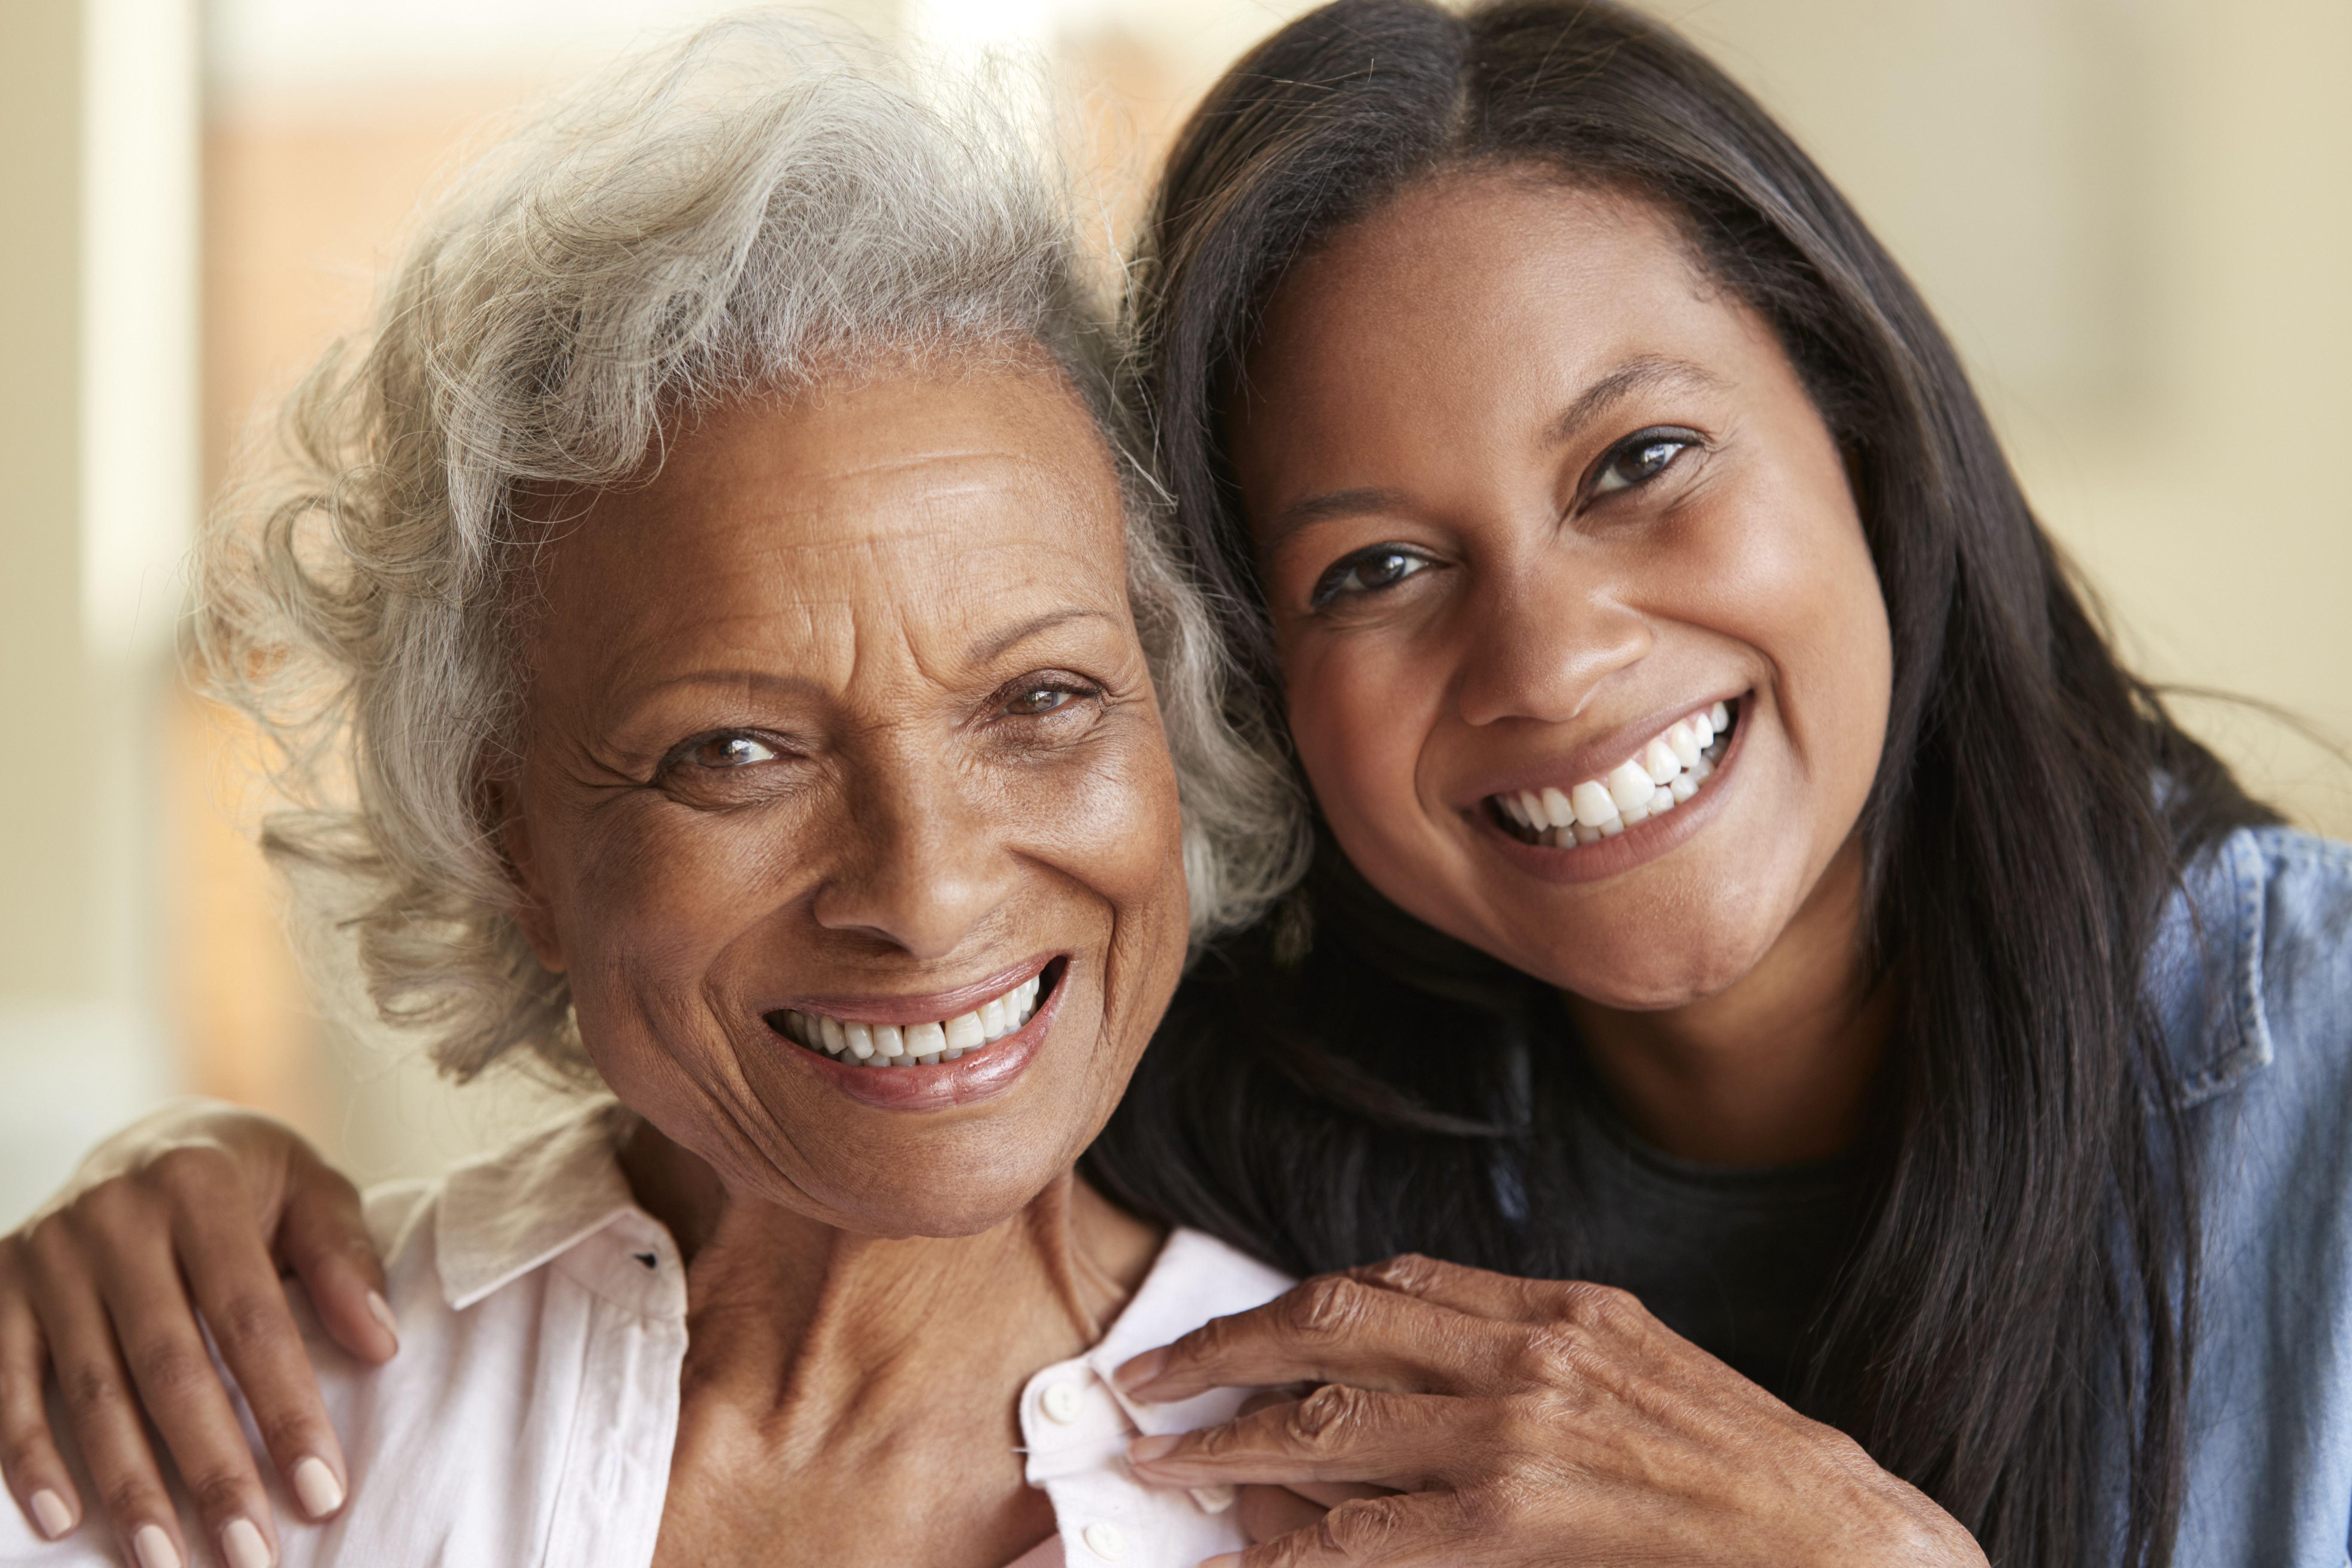 Helping your older loved one identify community resources